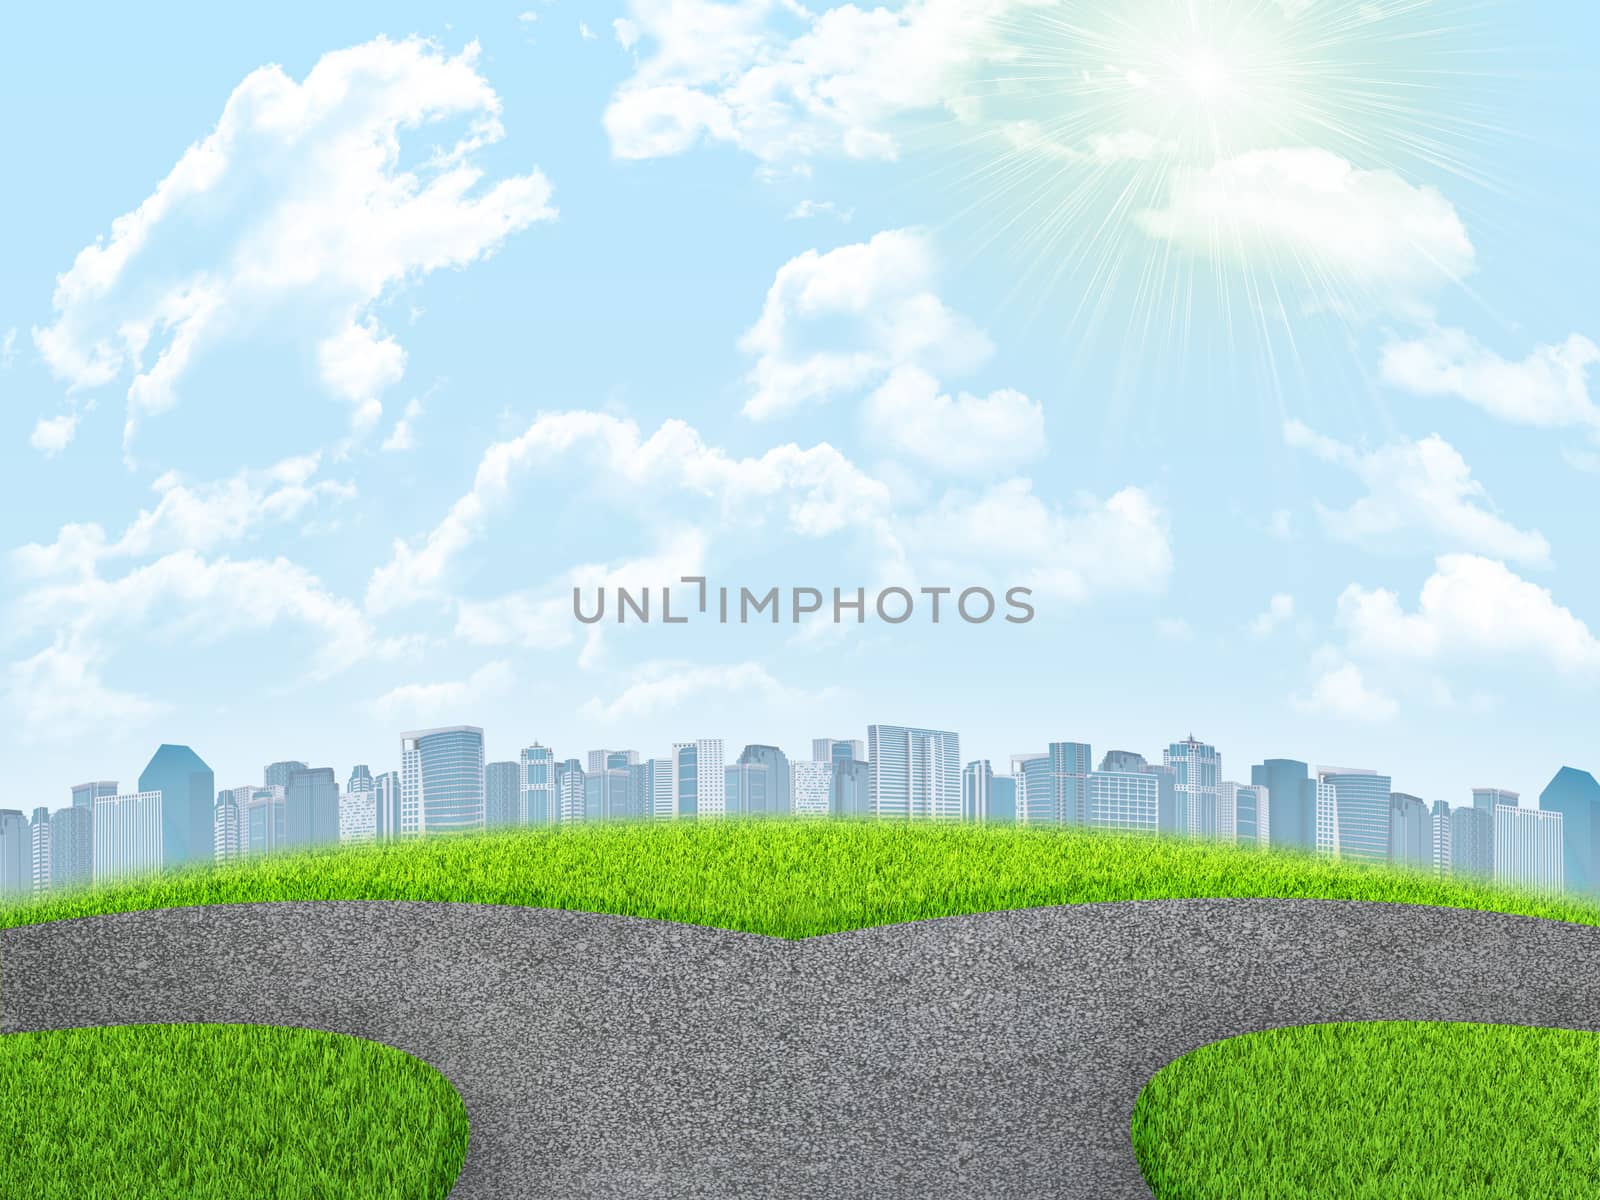 Road fork, green grass field and city. Sky with clouds in background